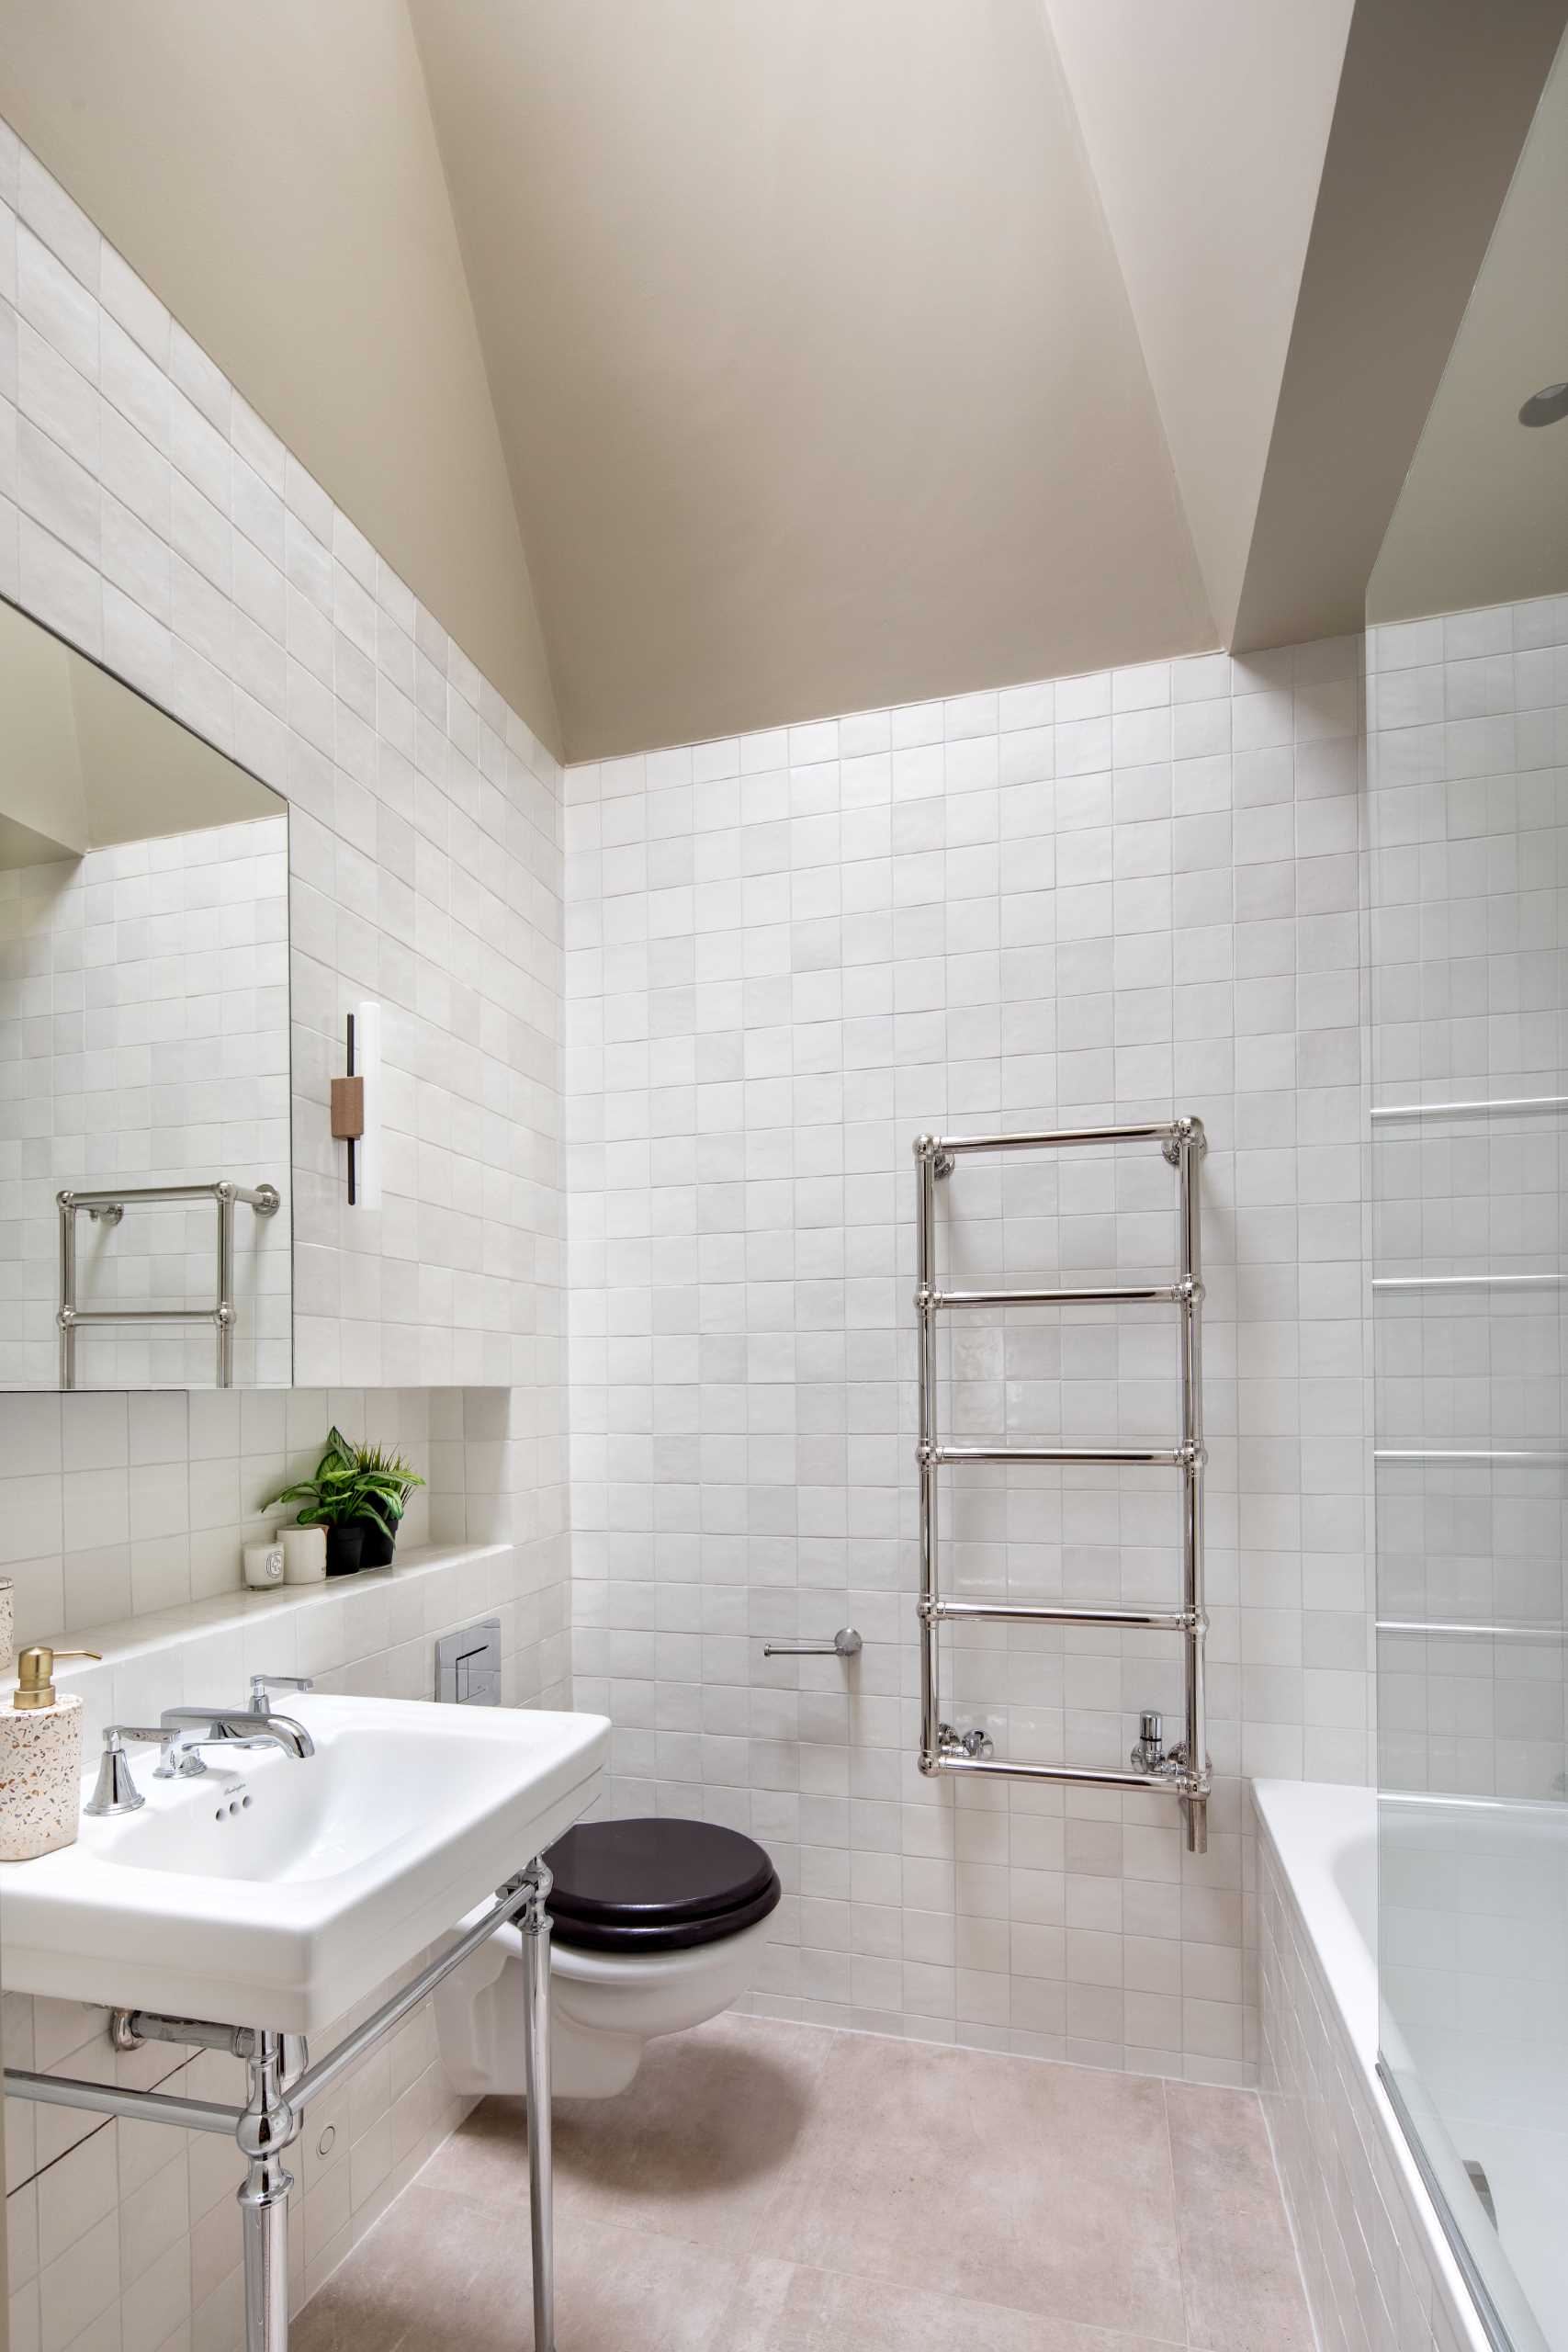 In this contemporary bathroom, square tiles cover the walls, a shelving niche adds storage, and a skylight adds natural light.